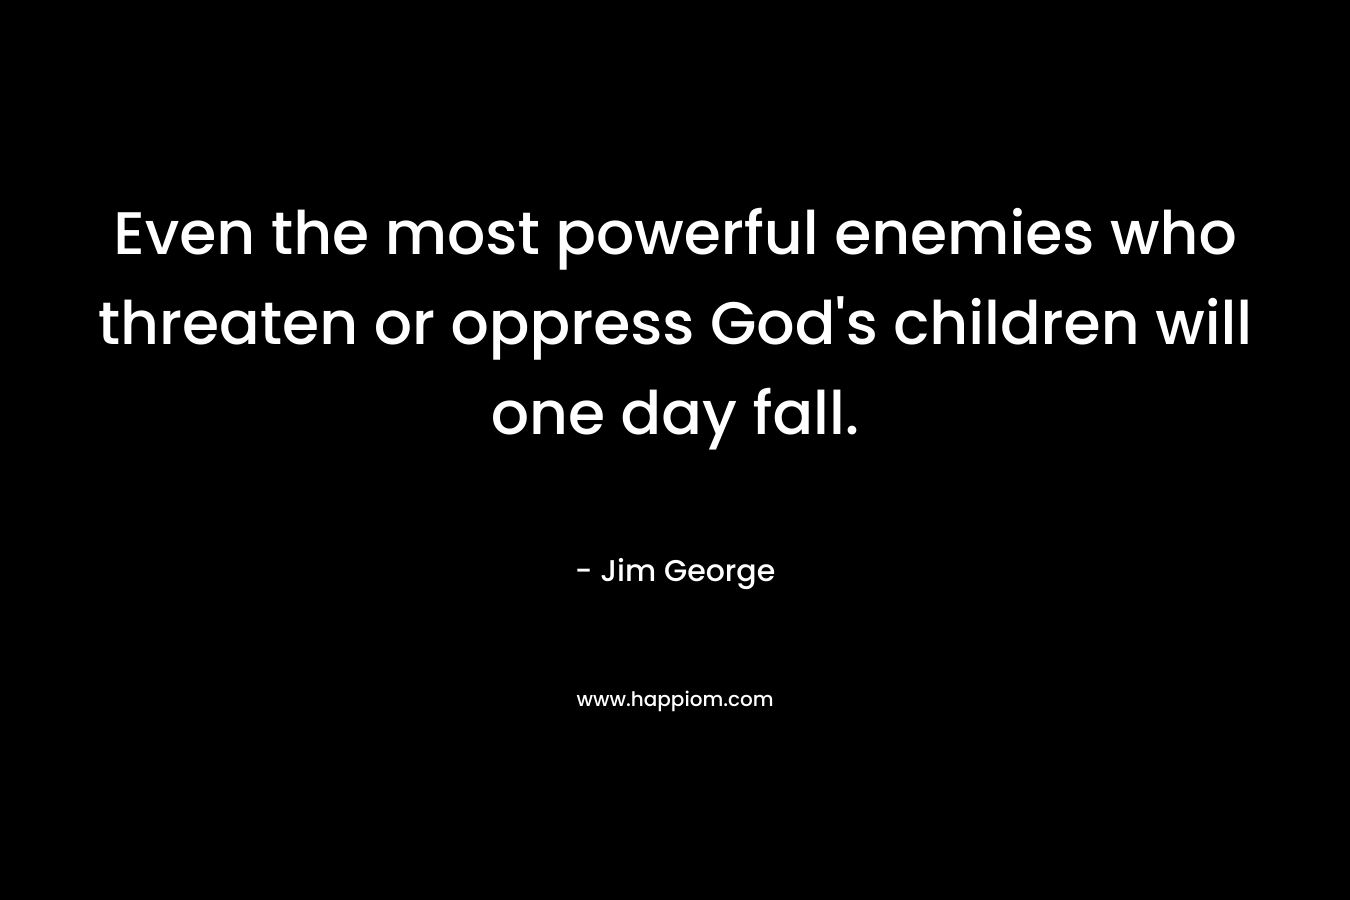 Even the most powerful enemies who threaten or oppress God’s children will one day fall. – Jim George